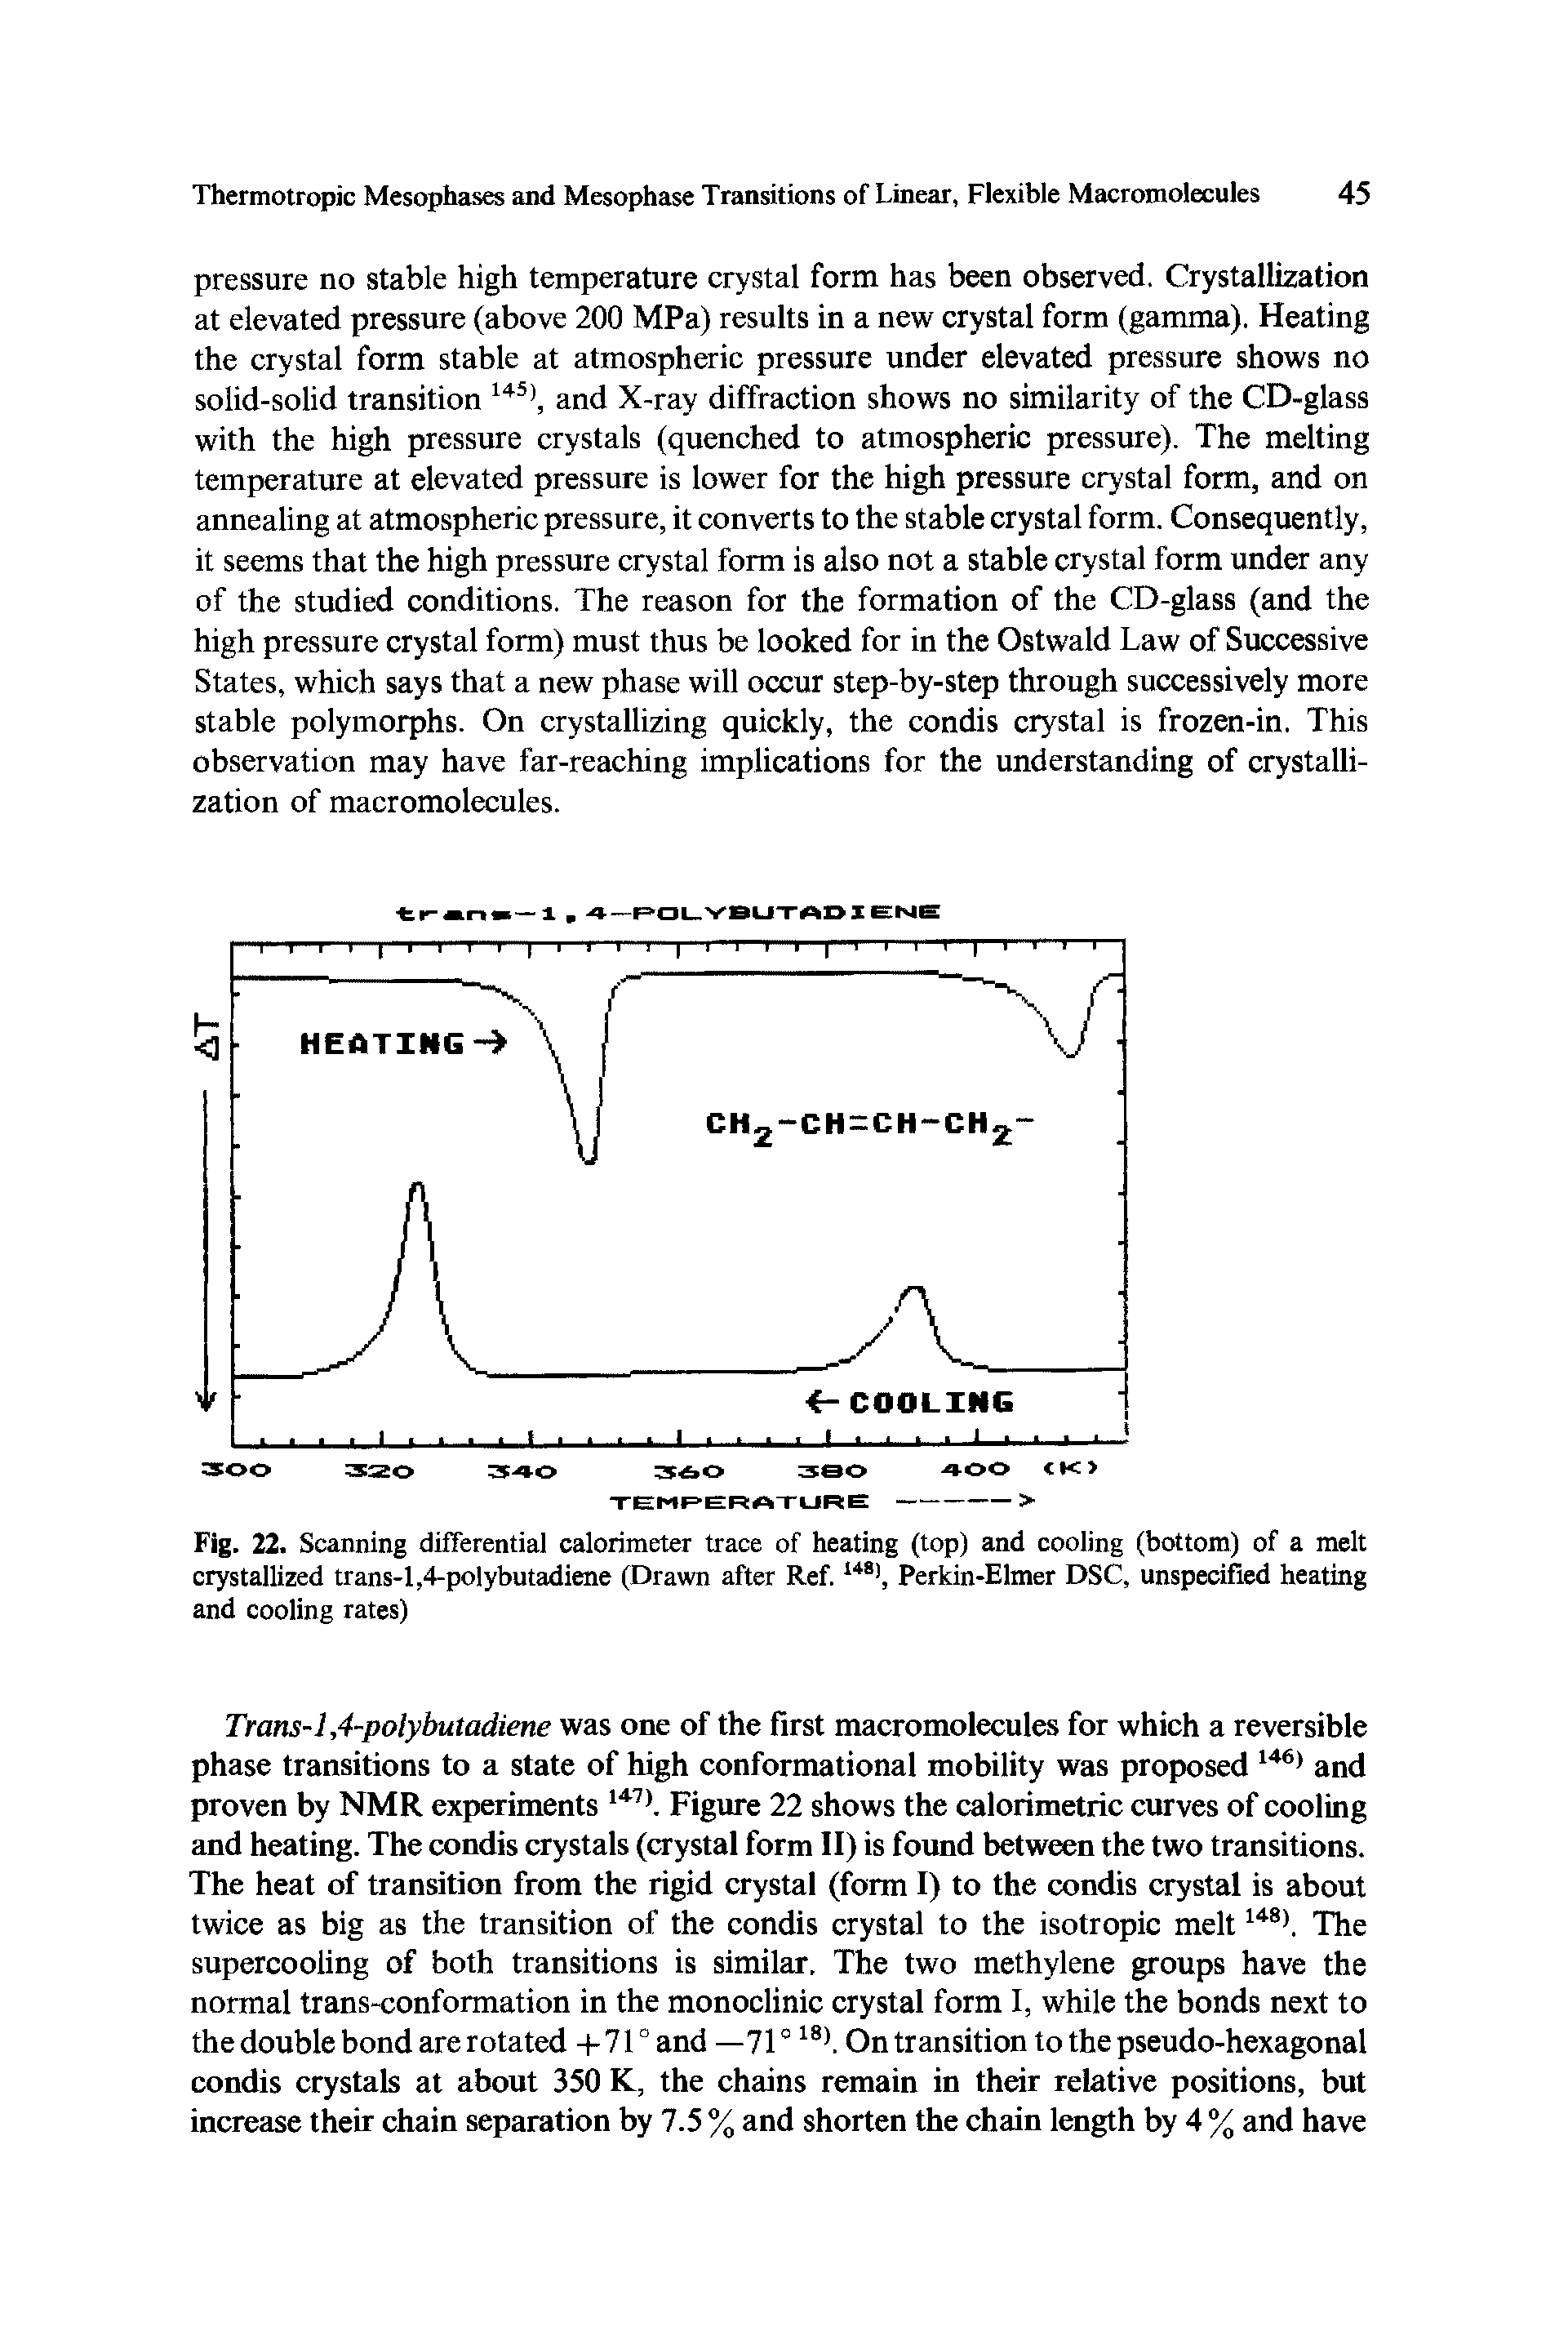 Fig. 22. Scanning differential calorimeter trace of heating (top) and cooling (bottom) of a melt crystallized trans-1,4-polybutadiene (Drawn after Ref.14S), Perkin-Elmer DSC, unspecified heating and cooling rates)...